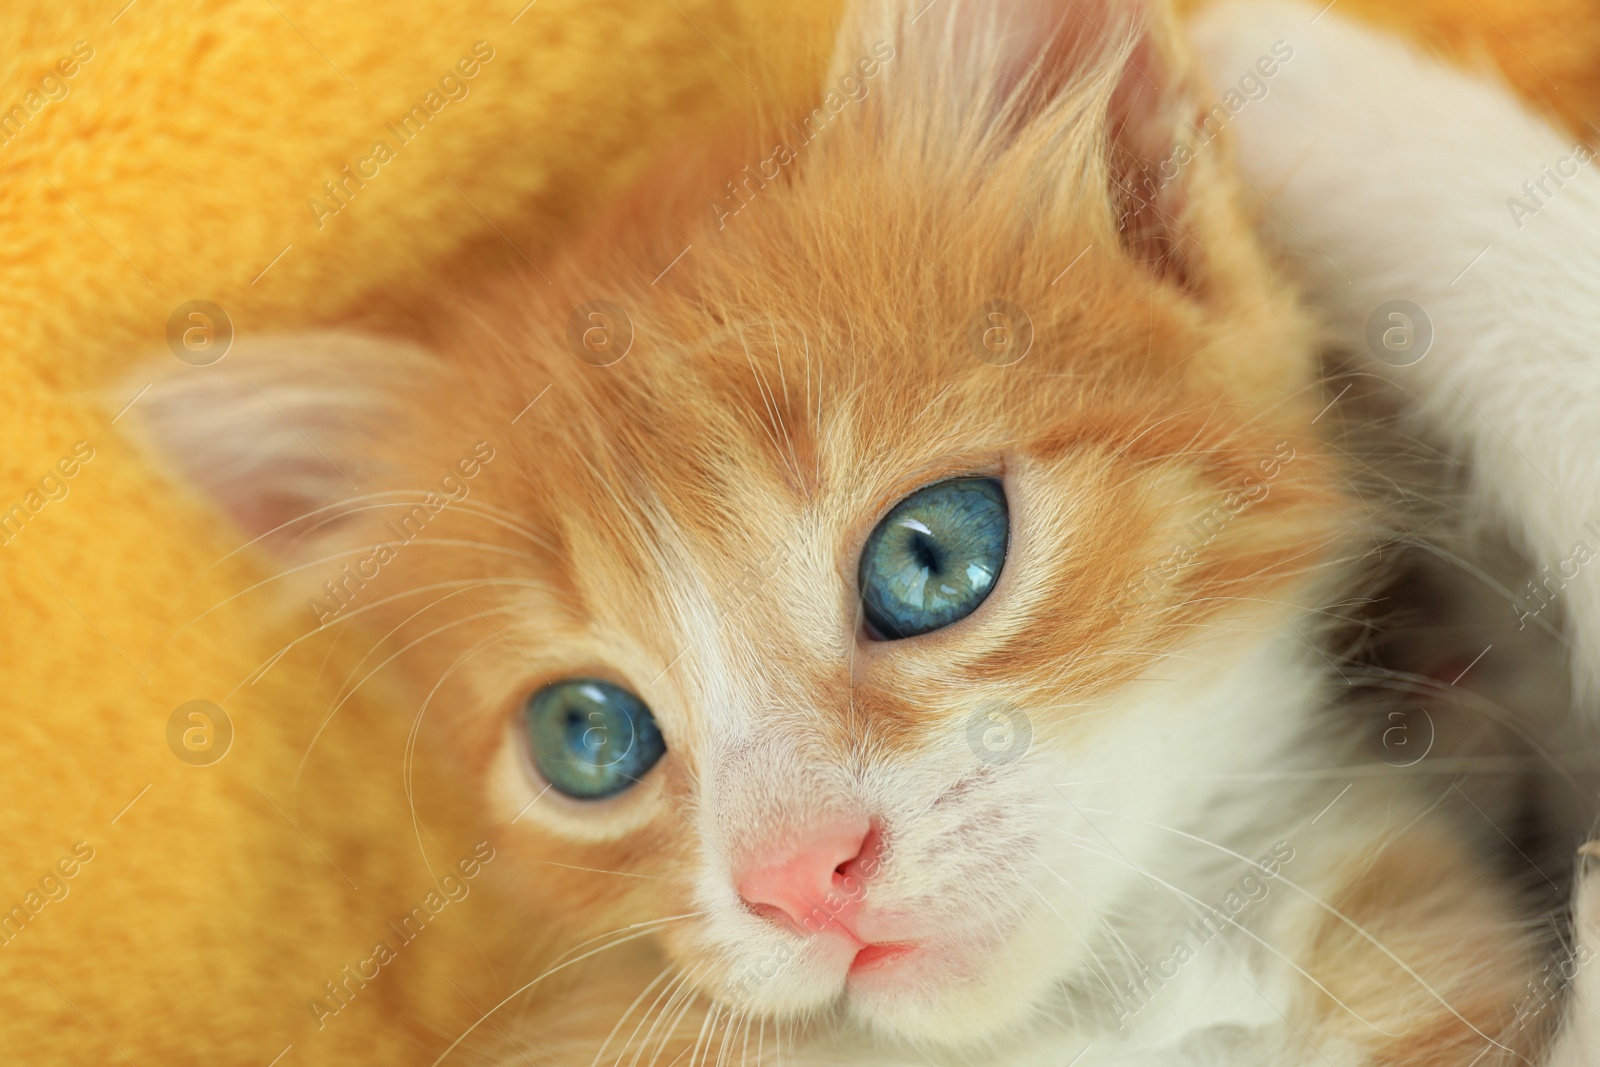 Photo of Cute little red kitten on yellow blanket, closeup view